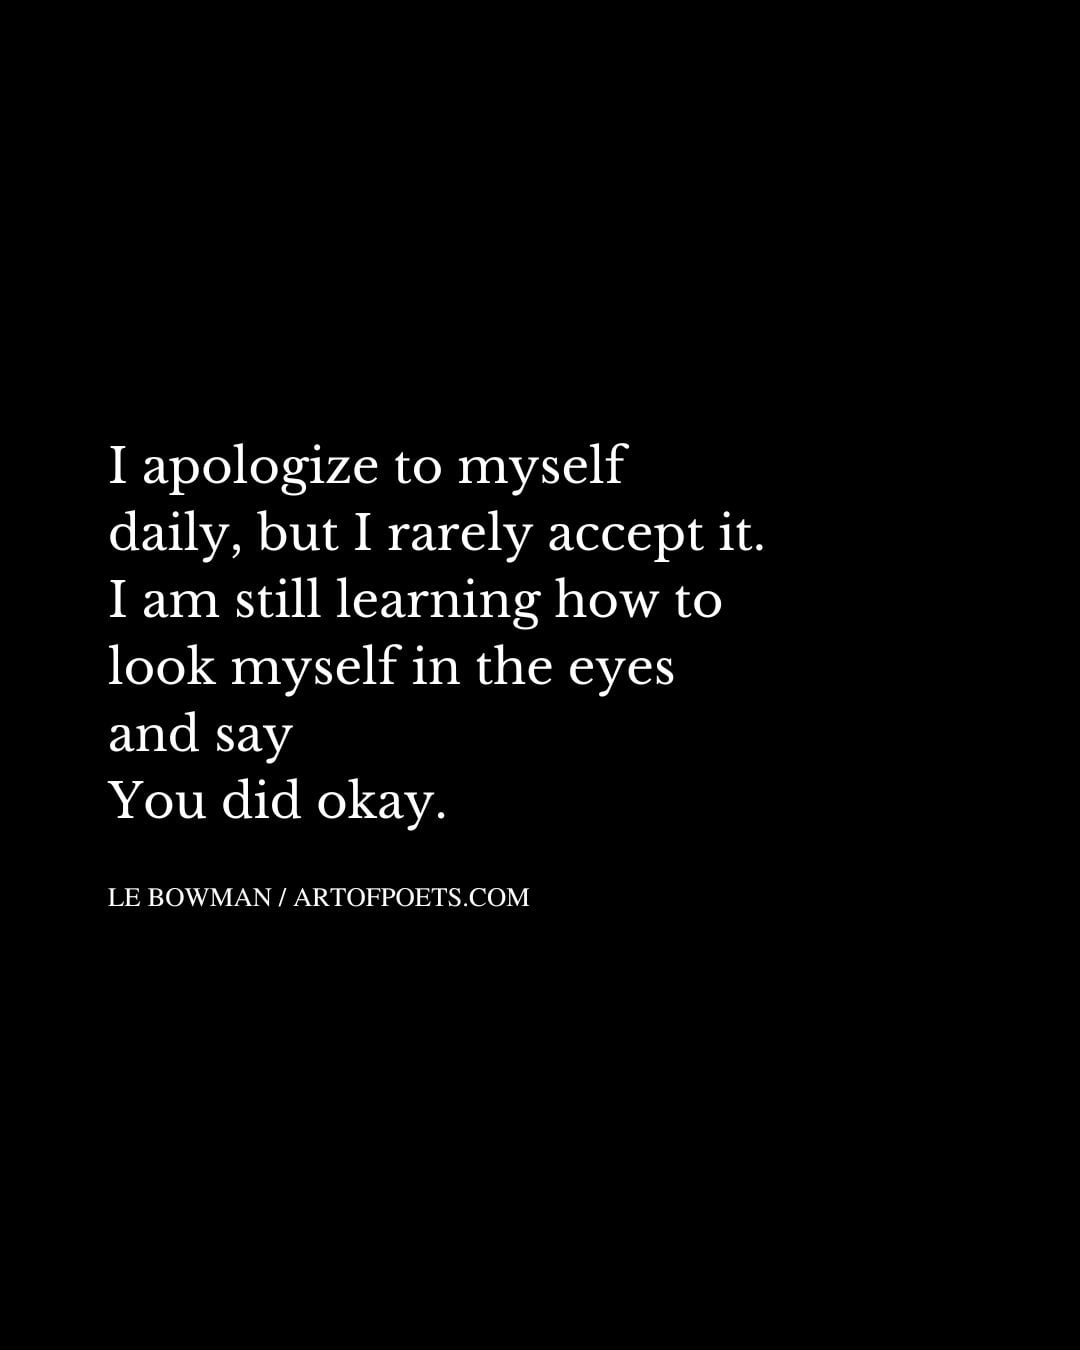 I apologize to myself daily but I rarely accept it. I am still learning how to look myself in the eyes and say You did okay